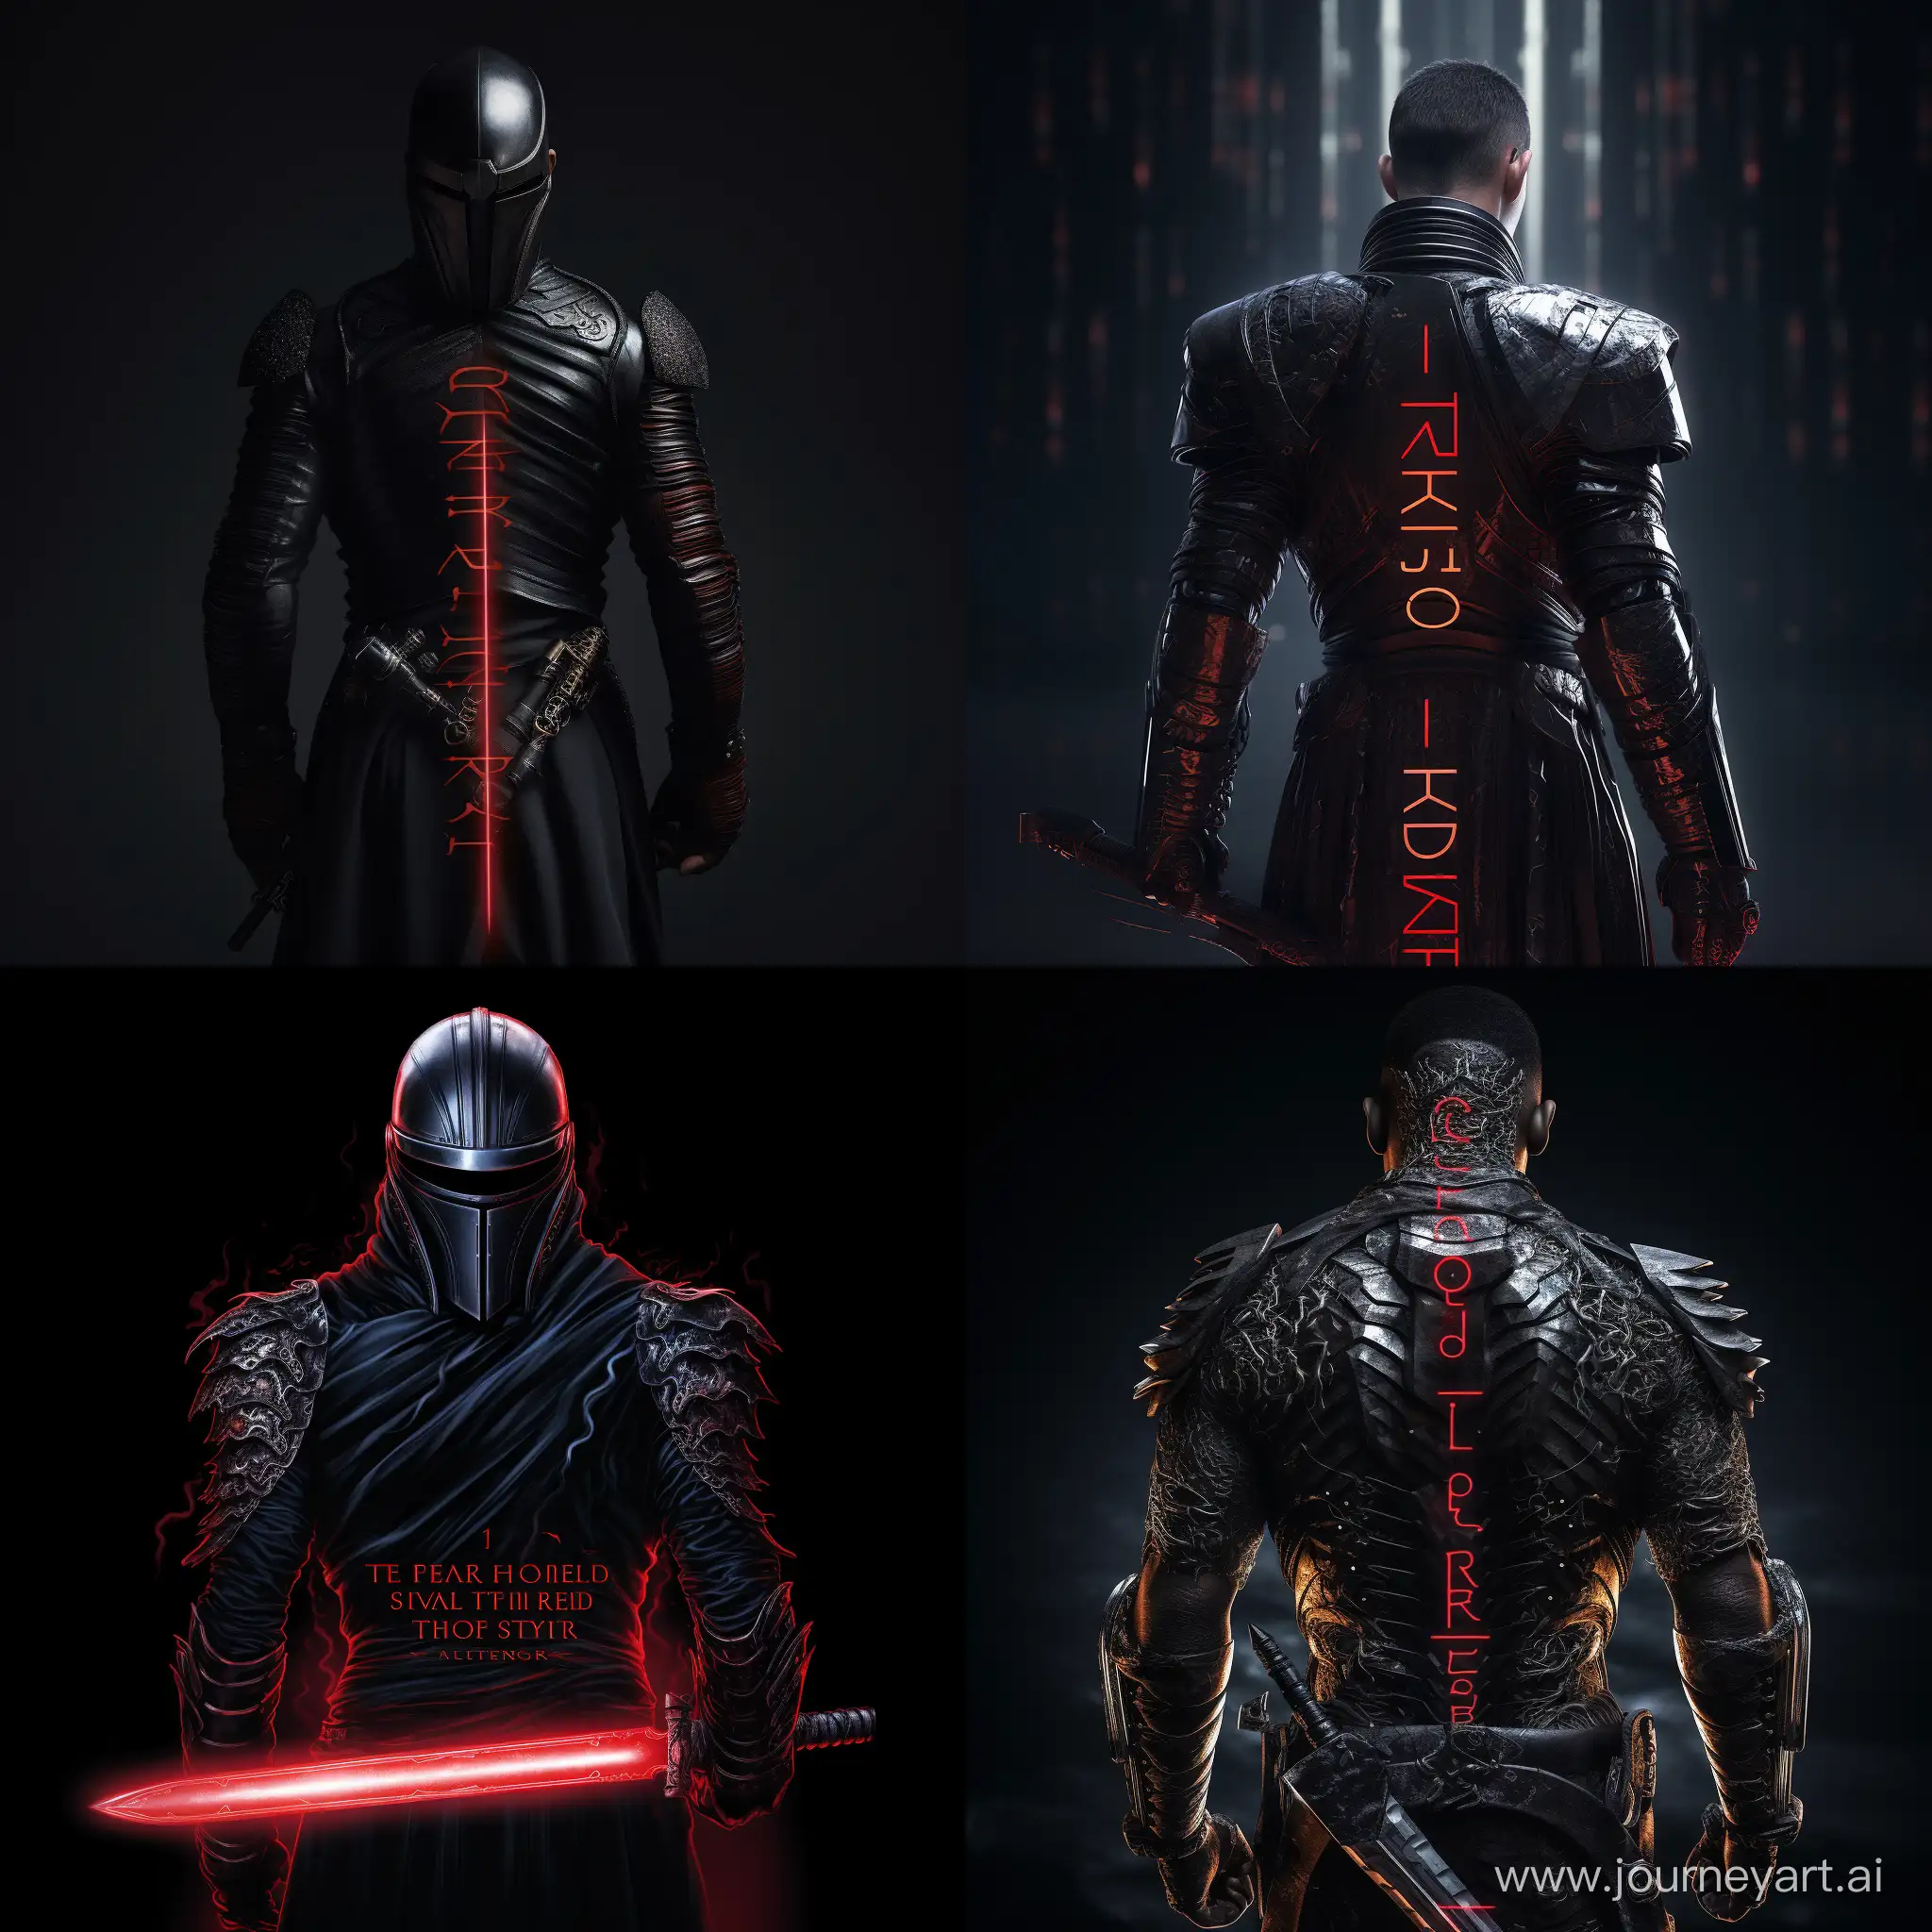 Mysterious-Warrior-with-Black-Lightsaber-and-Unique-T-Armor